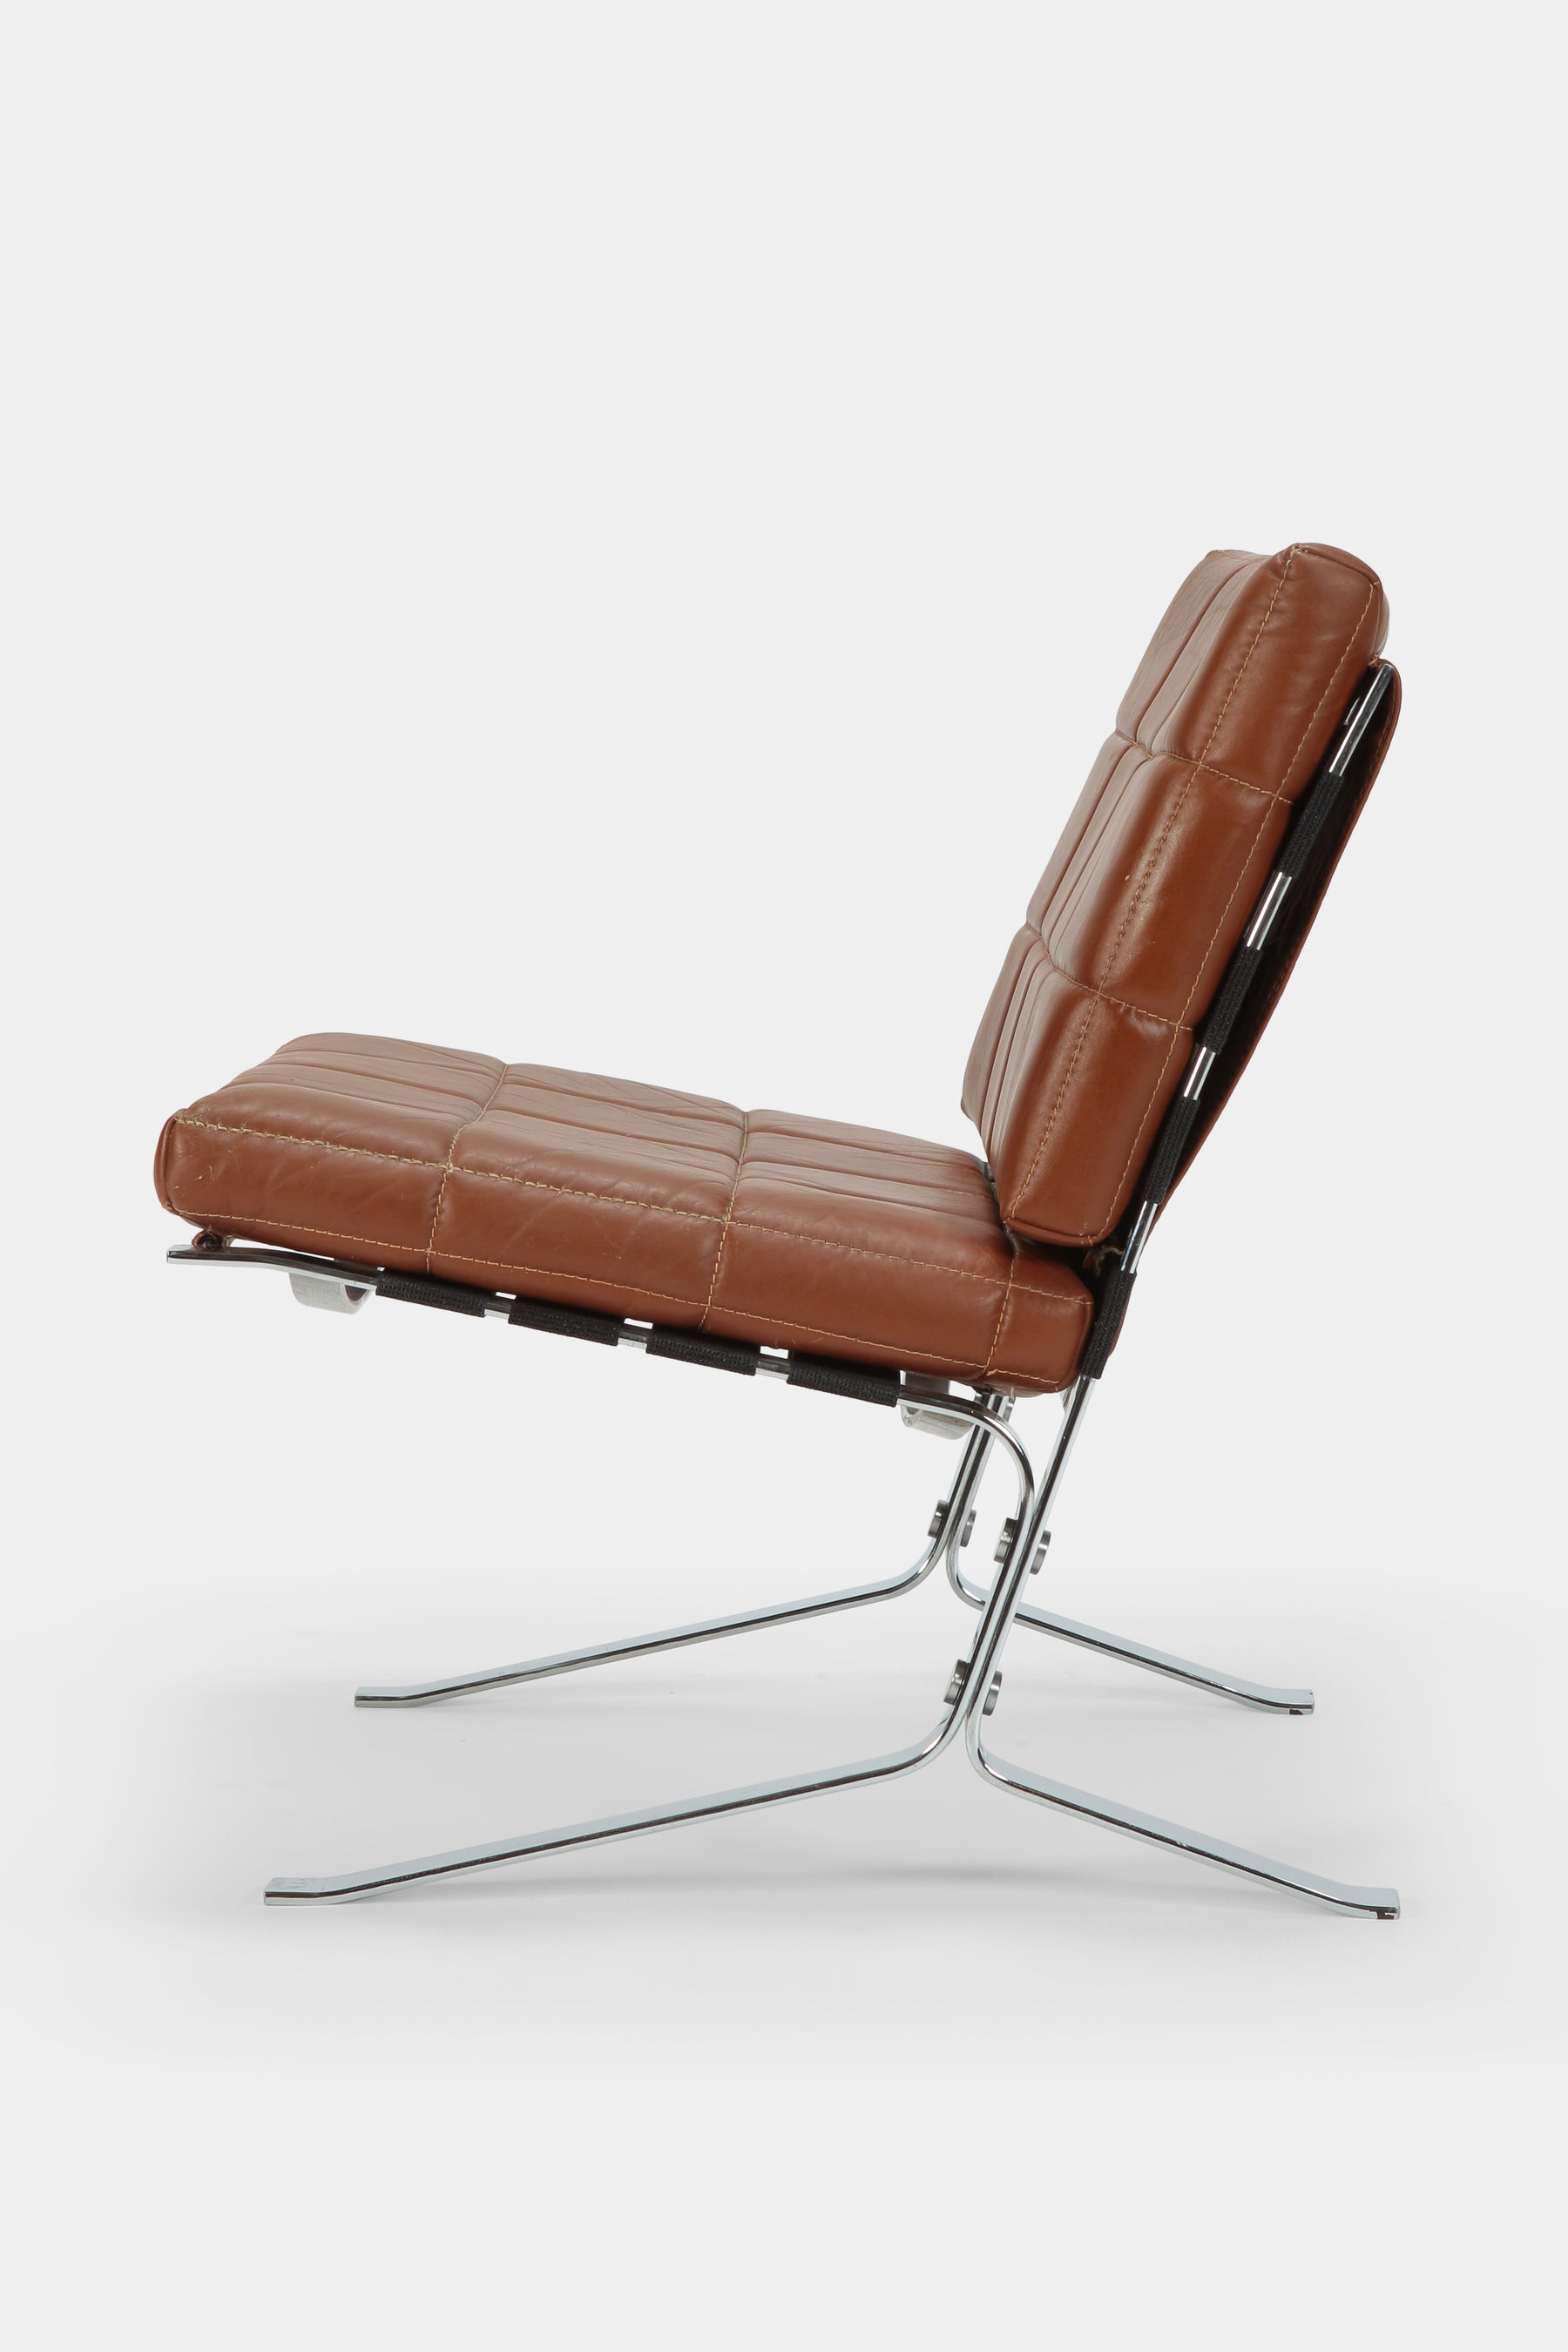 Olivier Mourgue Joker Lounge Chair Airborne, 60s